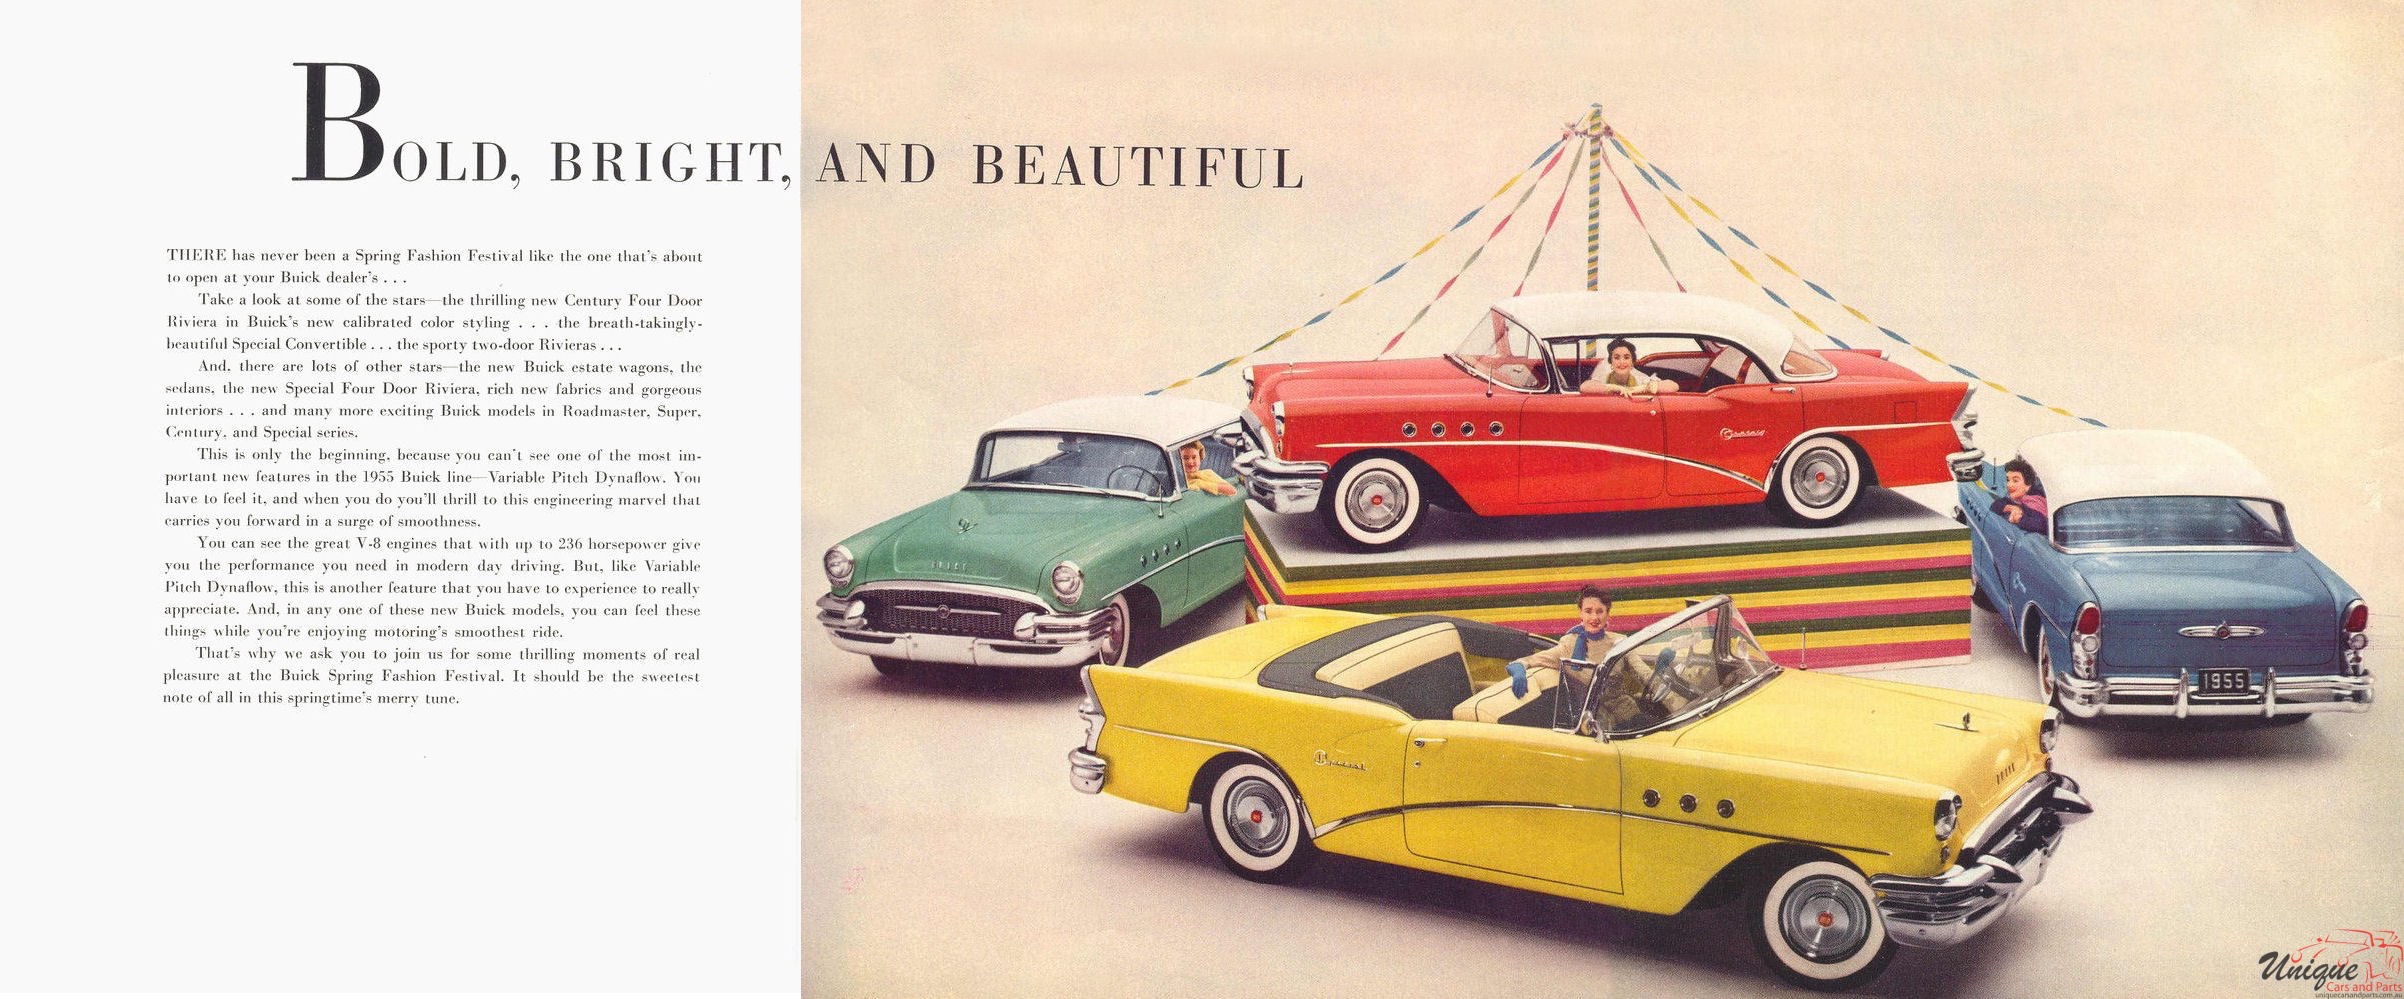 1955 Buick Spring Fashion Festival Brochure Page 1